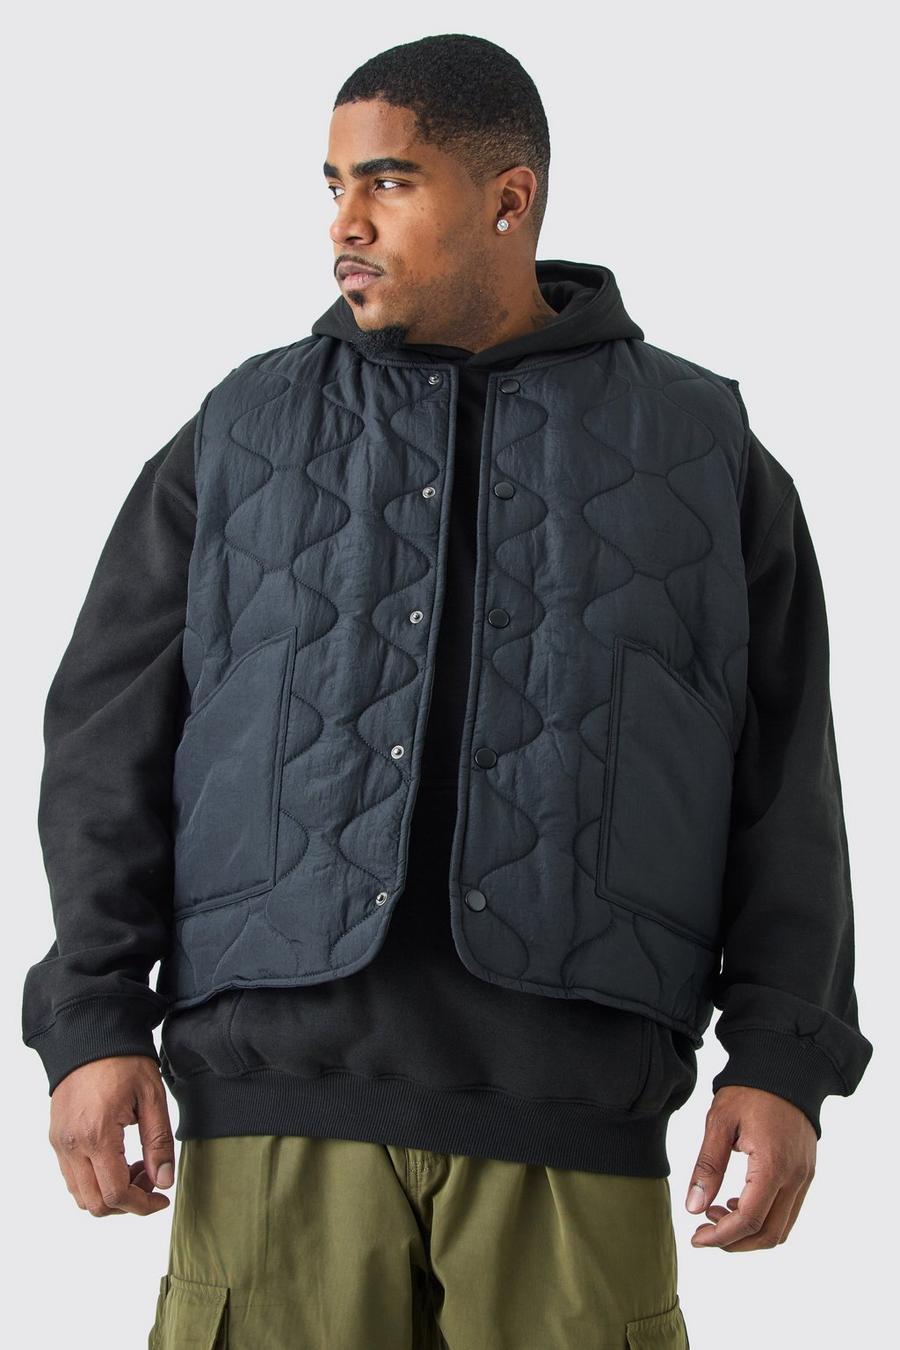 Black Plus Onion Quilted Gilet